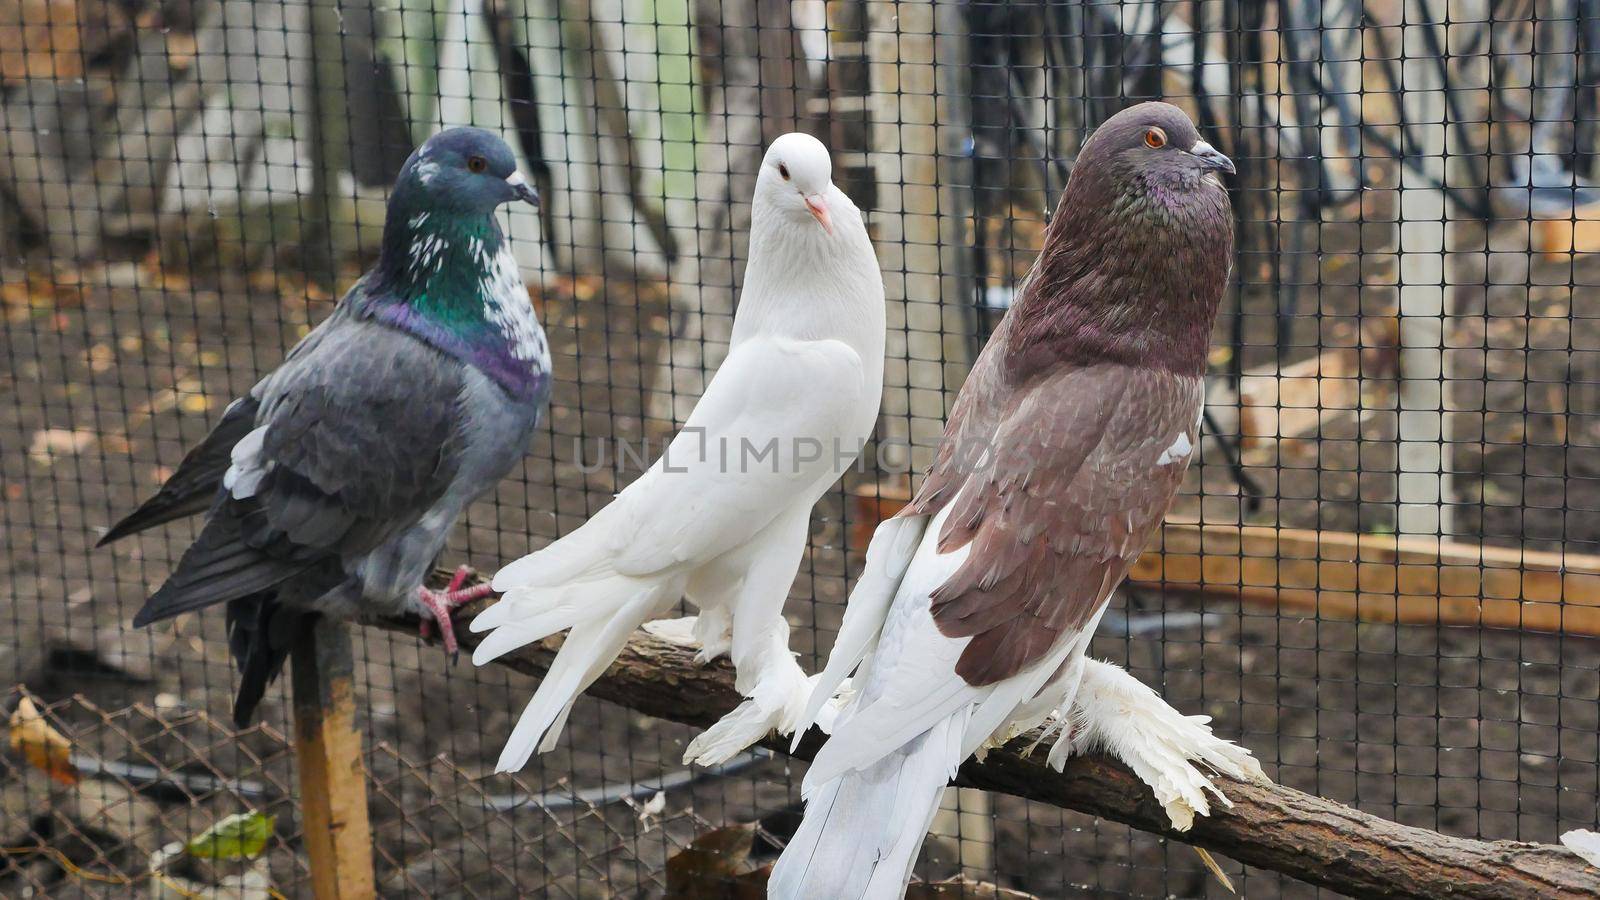 Decorative pigeons of different breeds colors with shaggy paws on a farm in a cage. by RecCameraStock